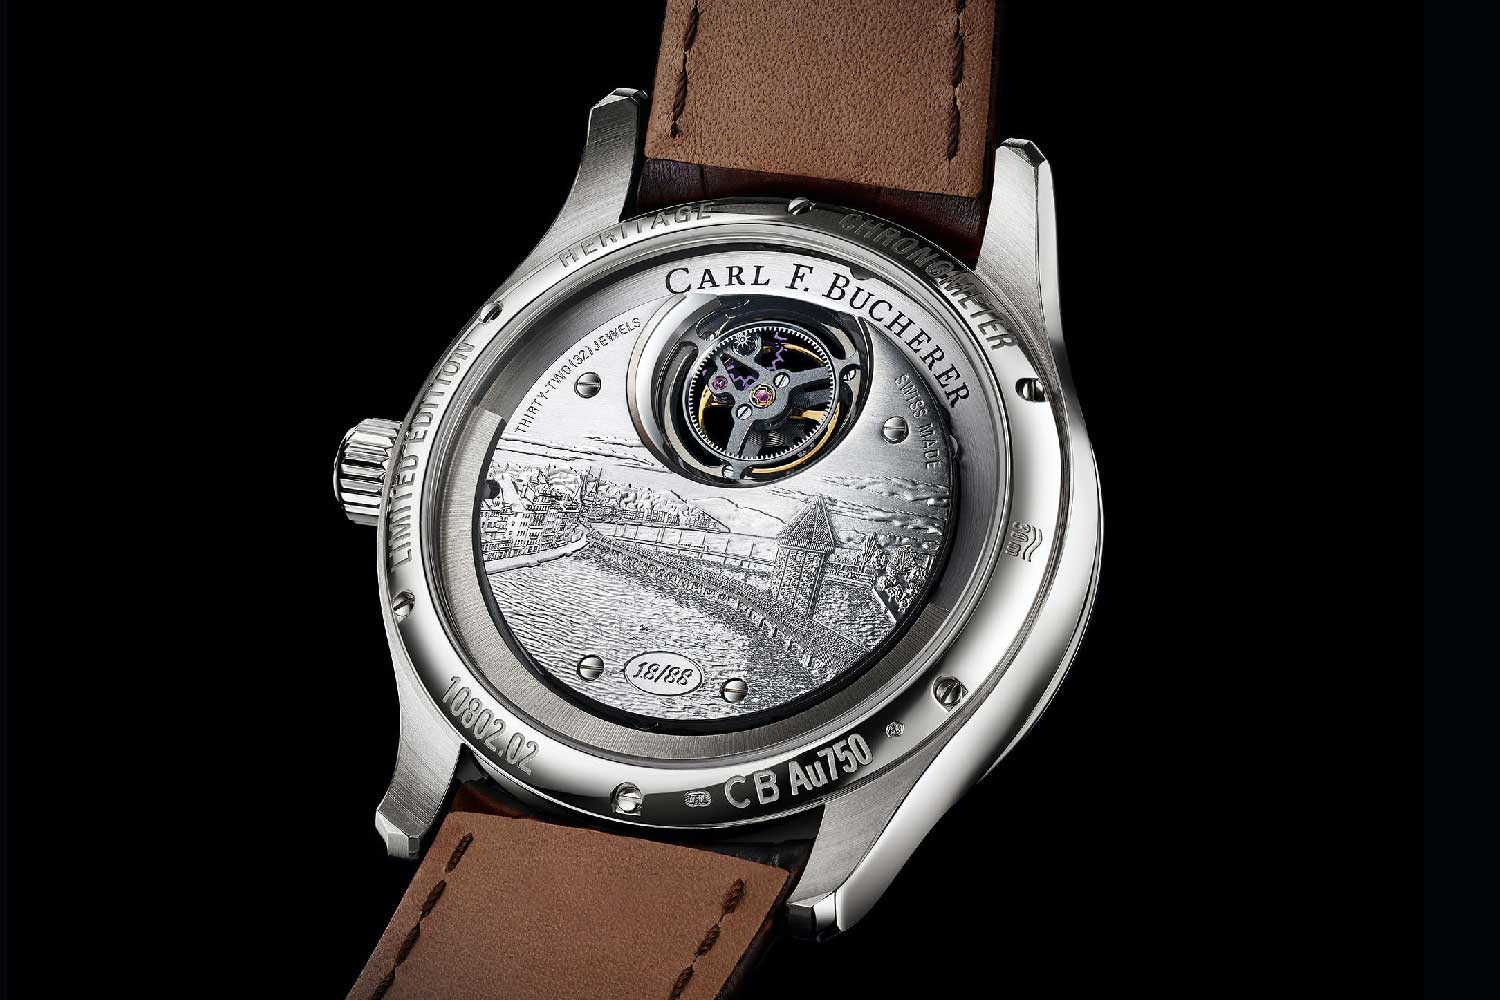 The caseback has an elaborate engraving of a city view of Lucerne, an ode to Carl F. Bucherer’s hometown.